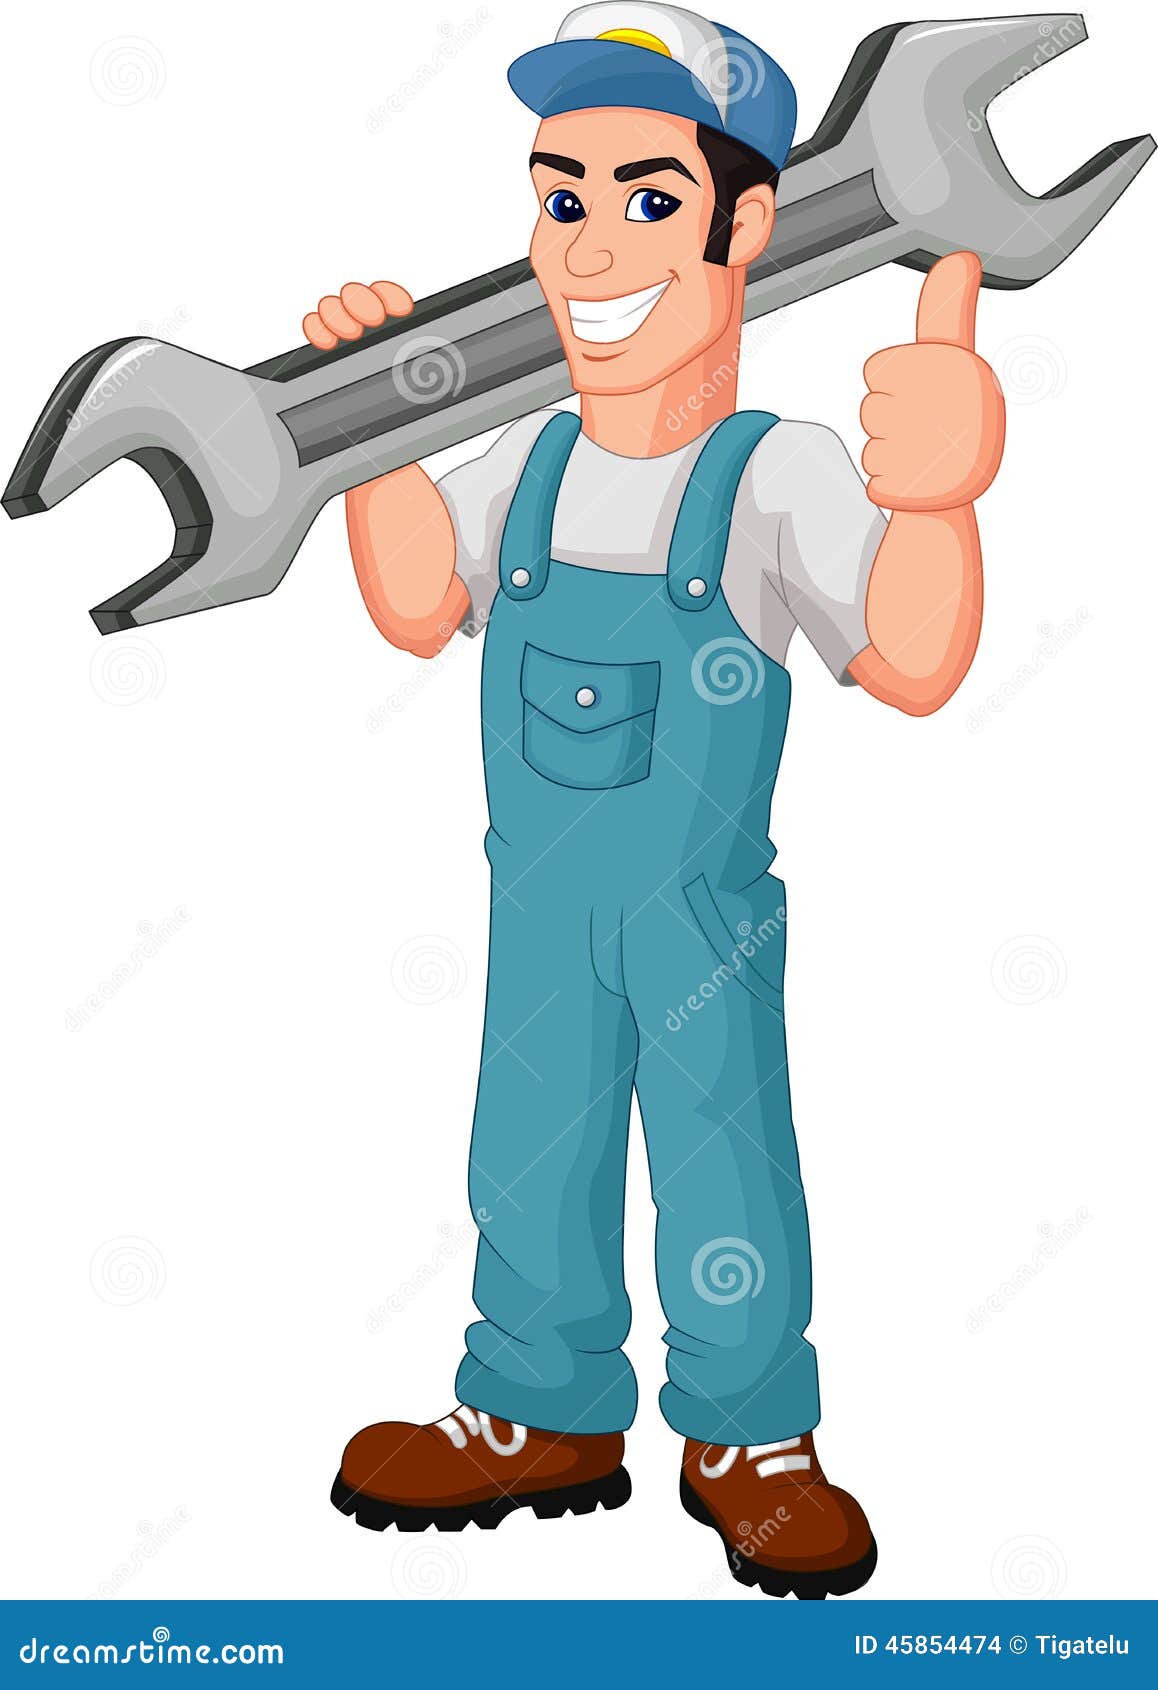 Funny Mechanic Cartoon Holding Wrench and Giving Thumbs Up Stock Vector -  Illustration of cartoon, holding: 45854474